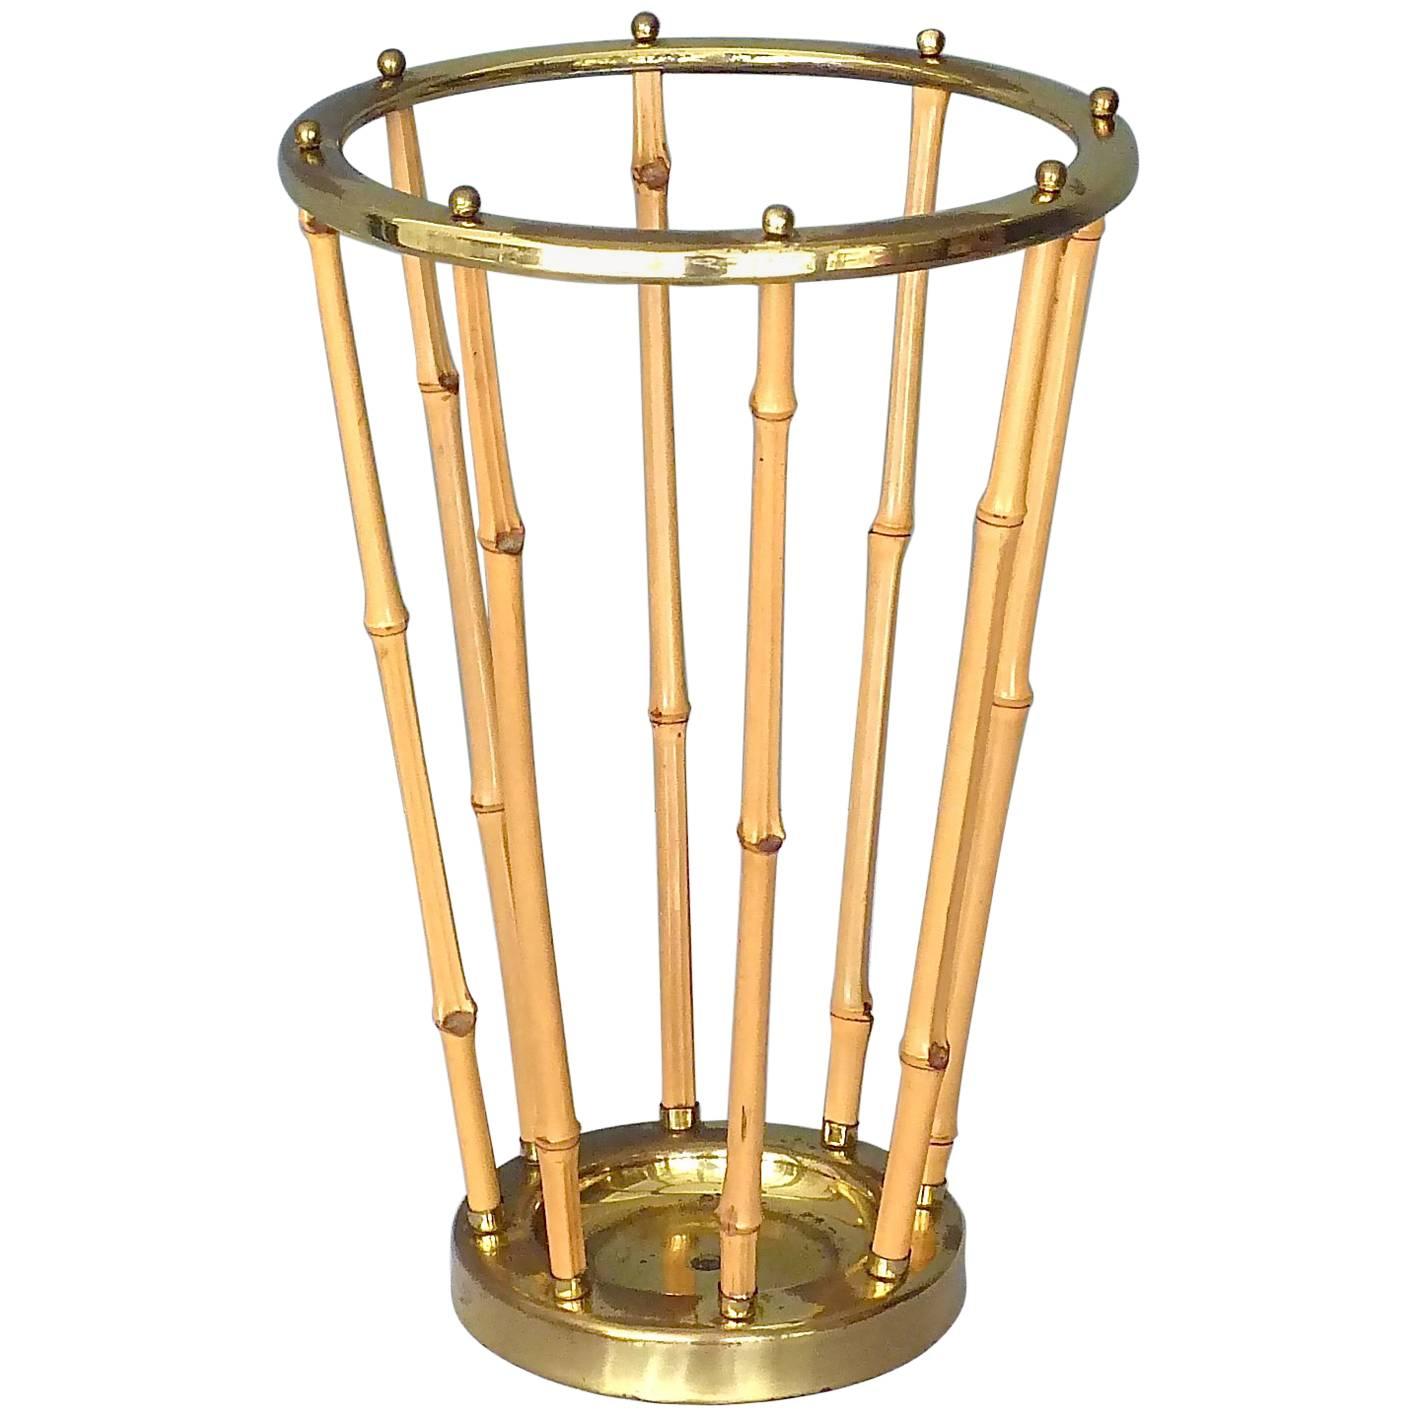 Midcentury Austrian Umbrella Stand Patinated Brass Bamboo Josef Frank Style 1950 For Sale